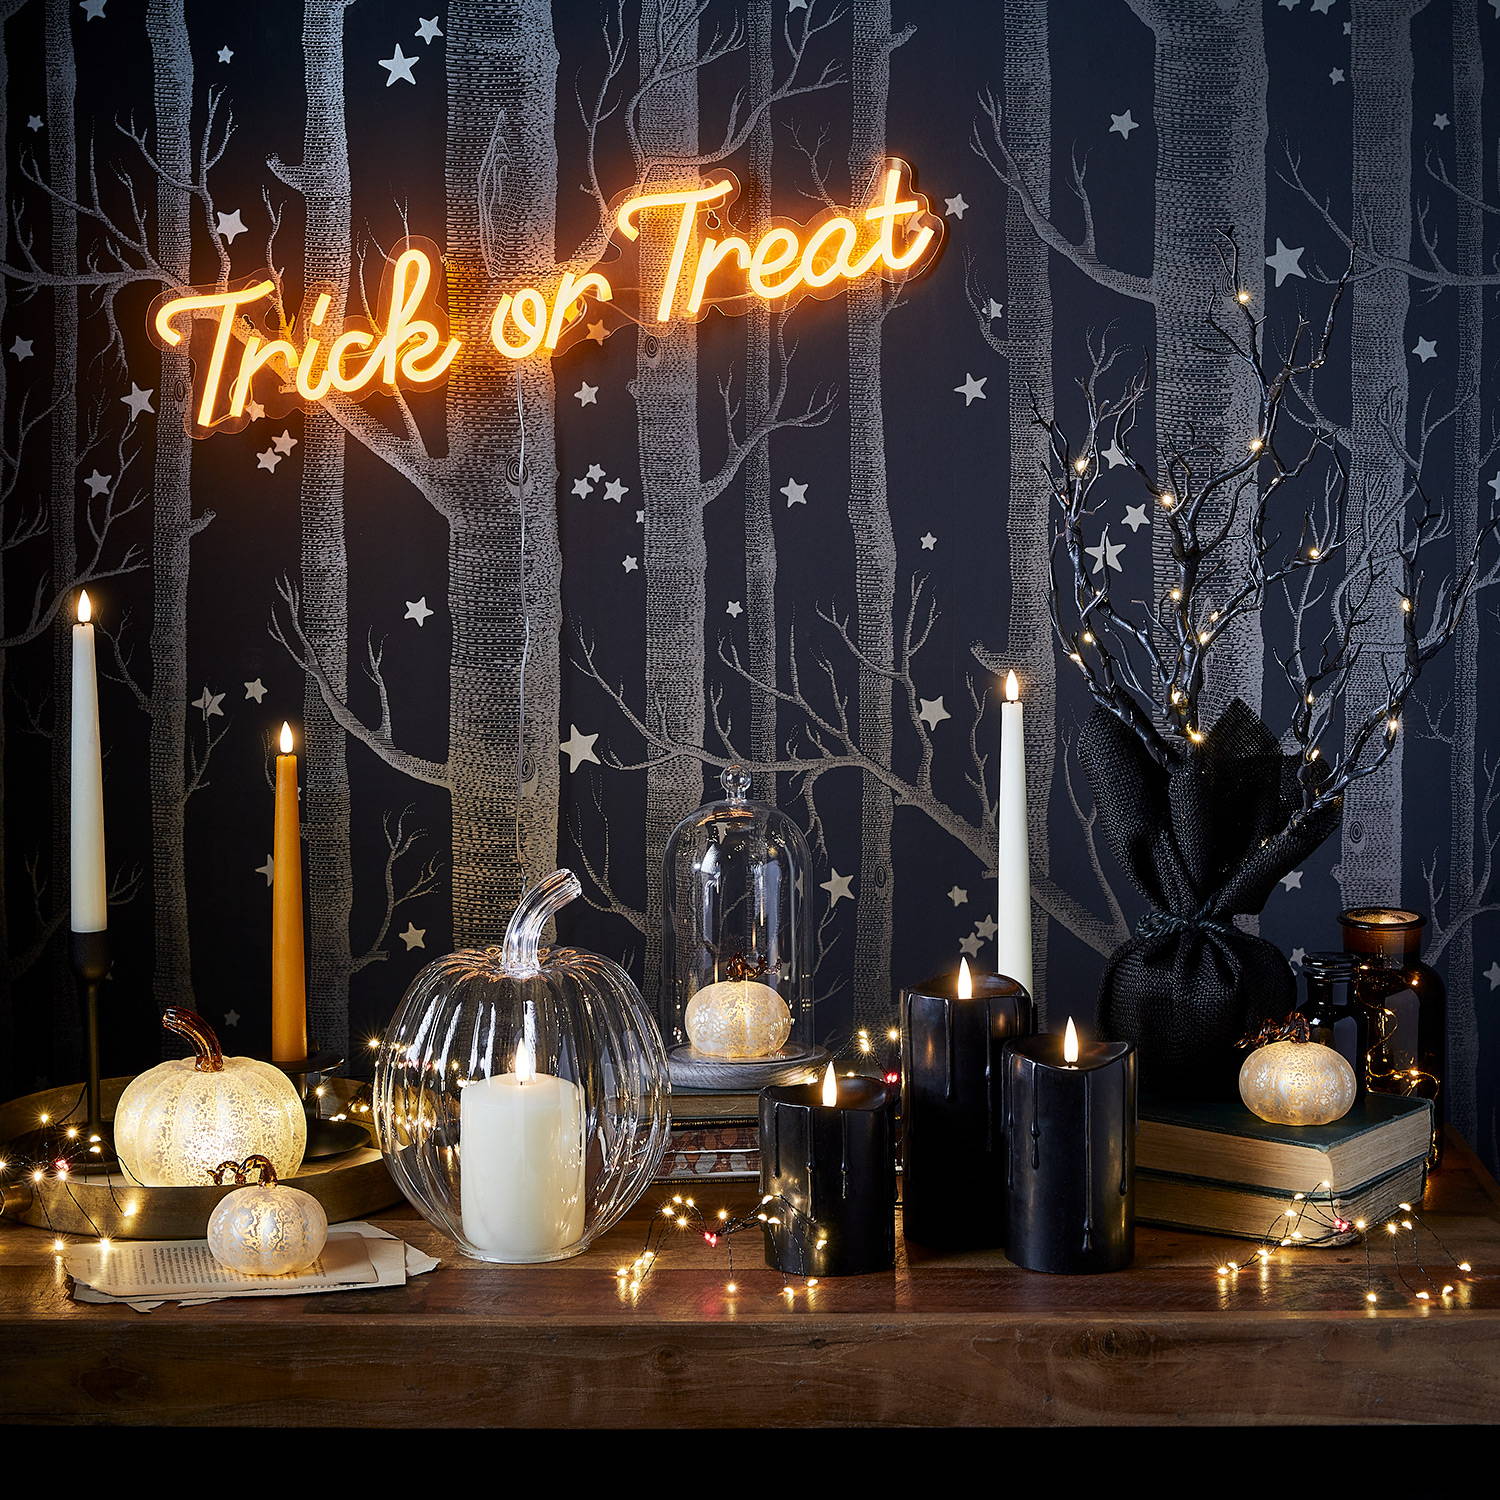 Trick or Treat wall light over a table decorated with pumpkins and candles.